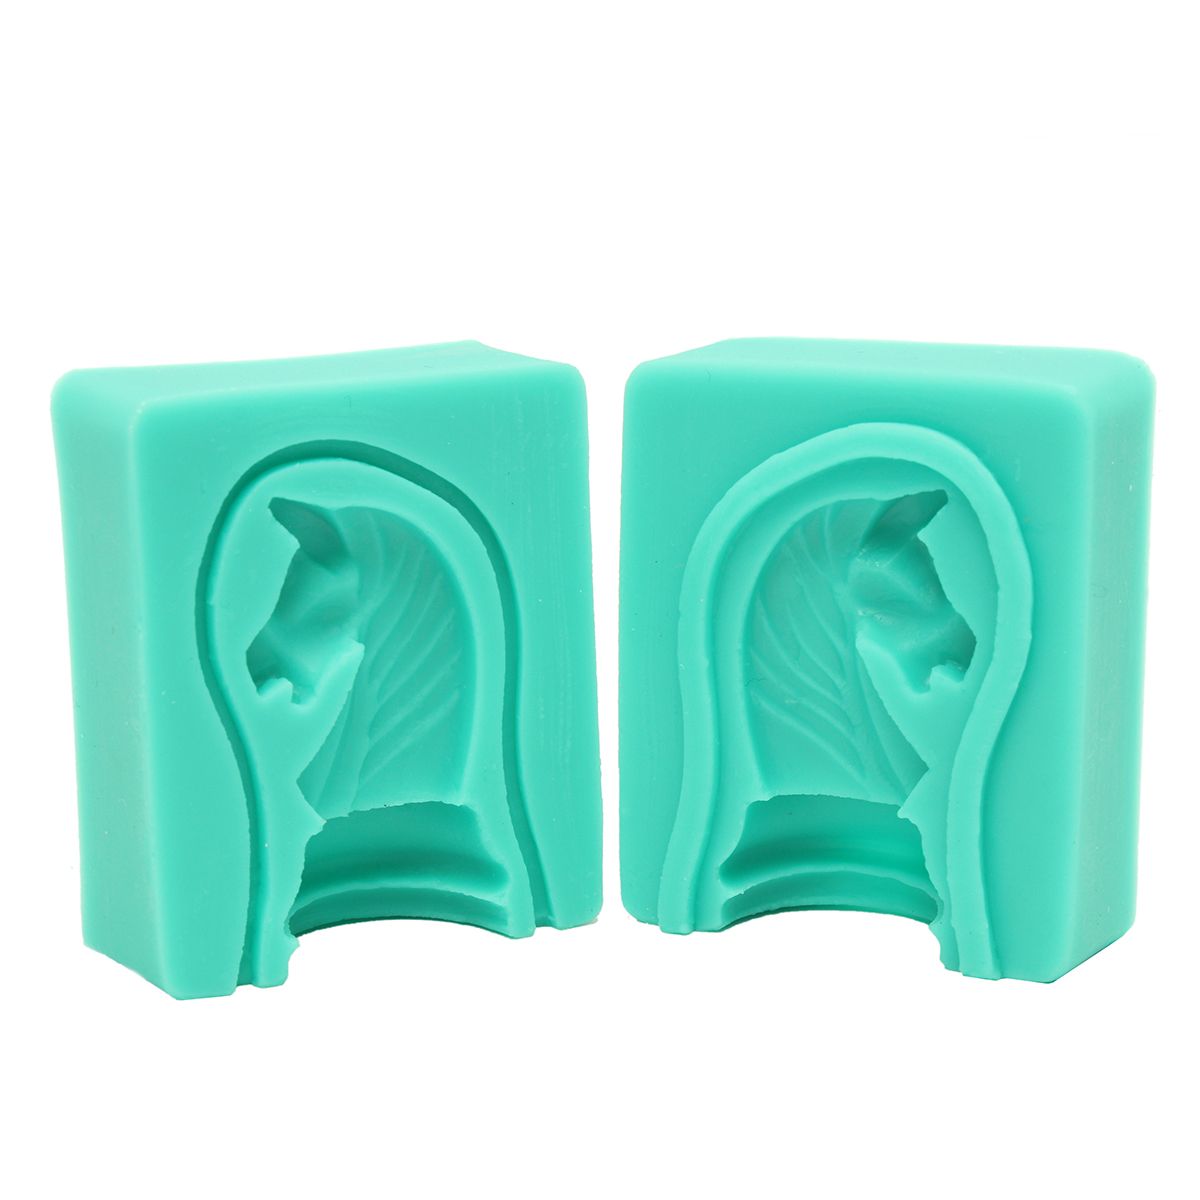 6-Sets-3D-Silicone-Fondant-Cake-International-Chess-Mold-Chocolate-Cupcake-Candy-Mould-Soap-Tool-1141477